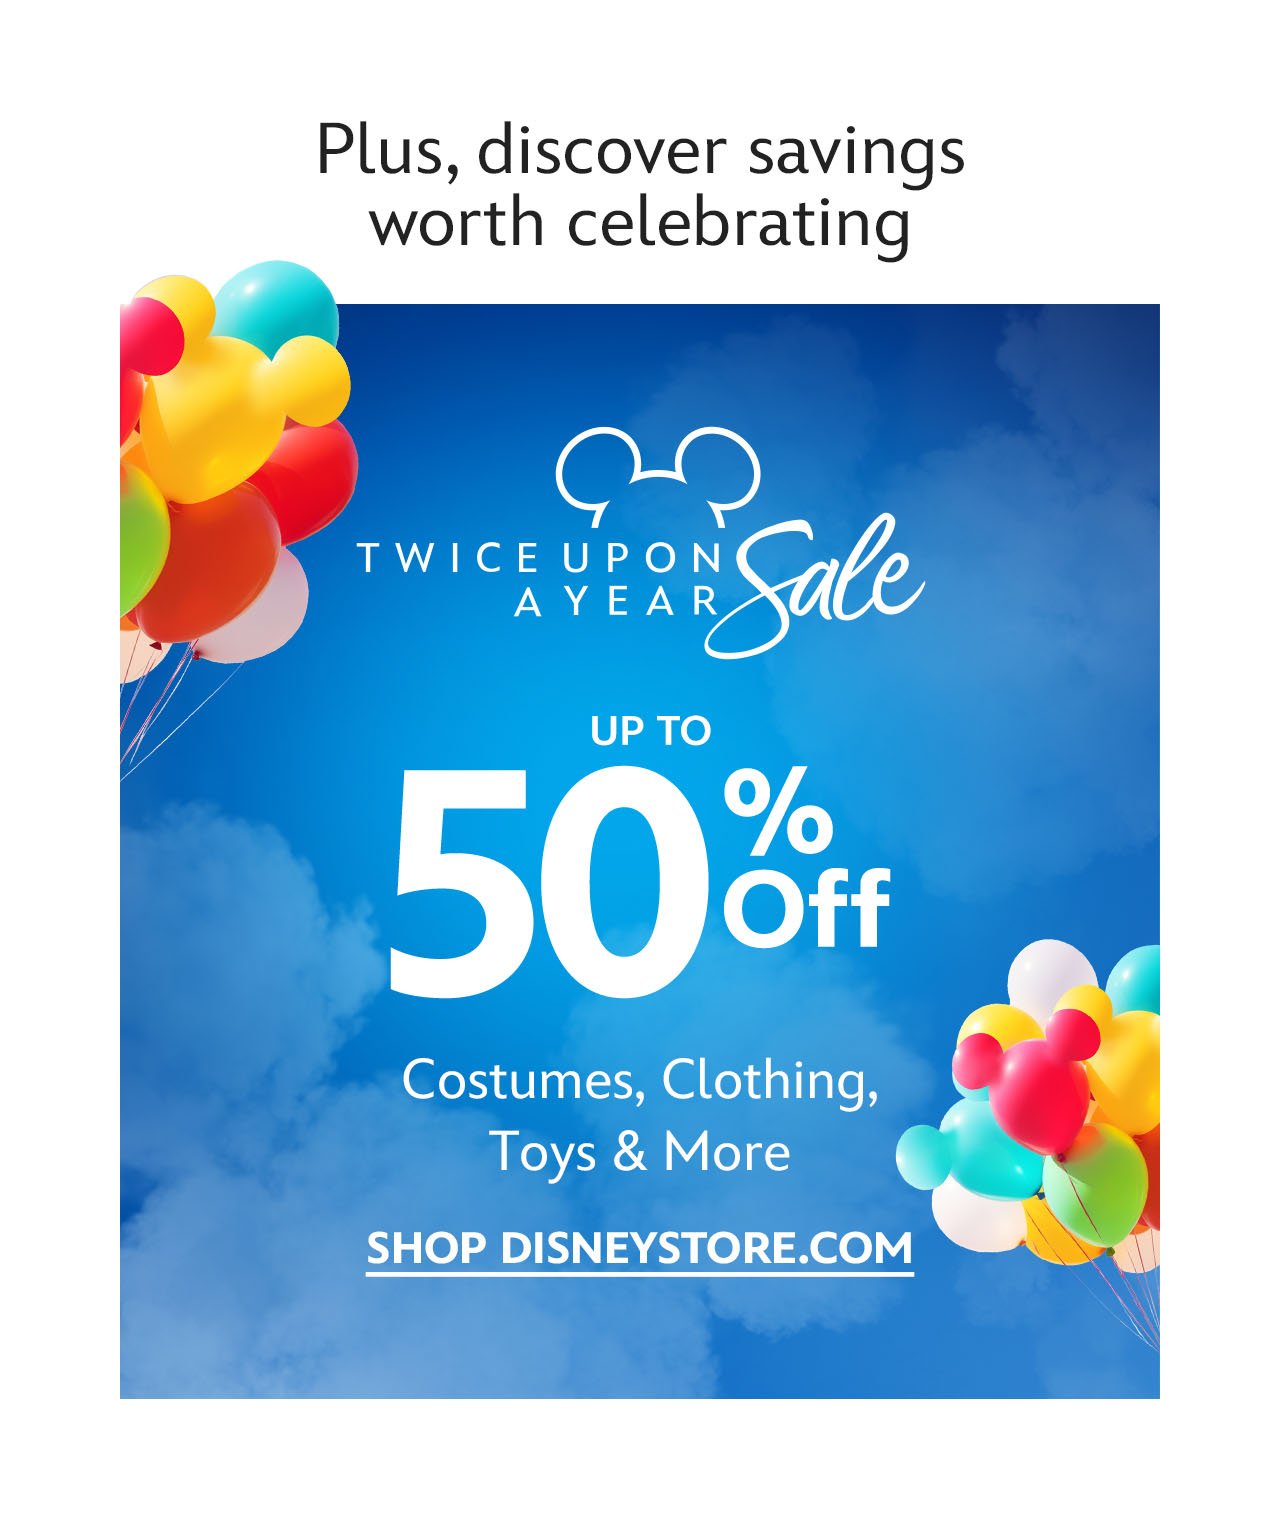 Twice Upon a Year. 50% Off Costumes, Clothing, Toys & More | Shop DisneyStore.com